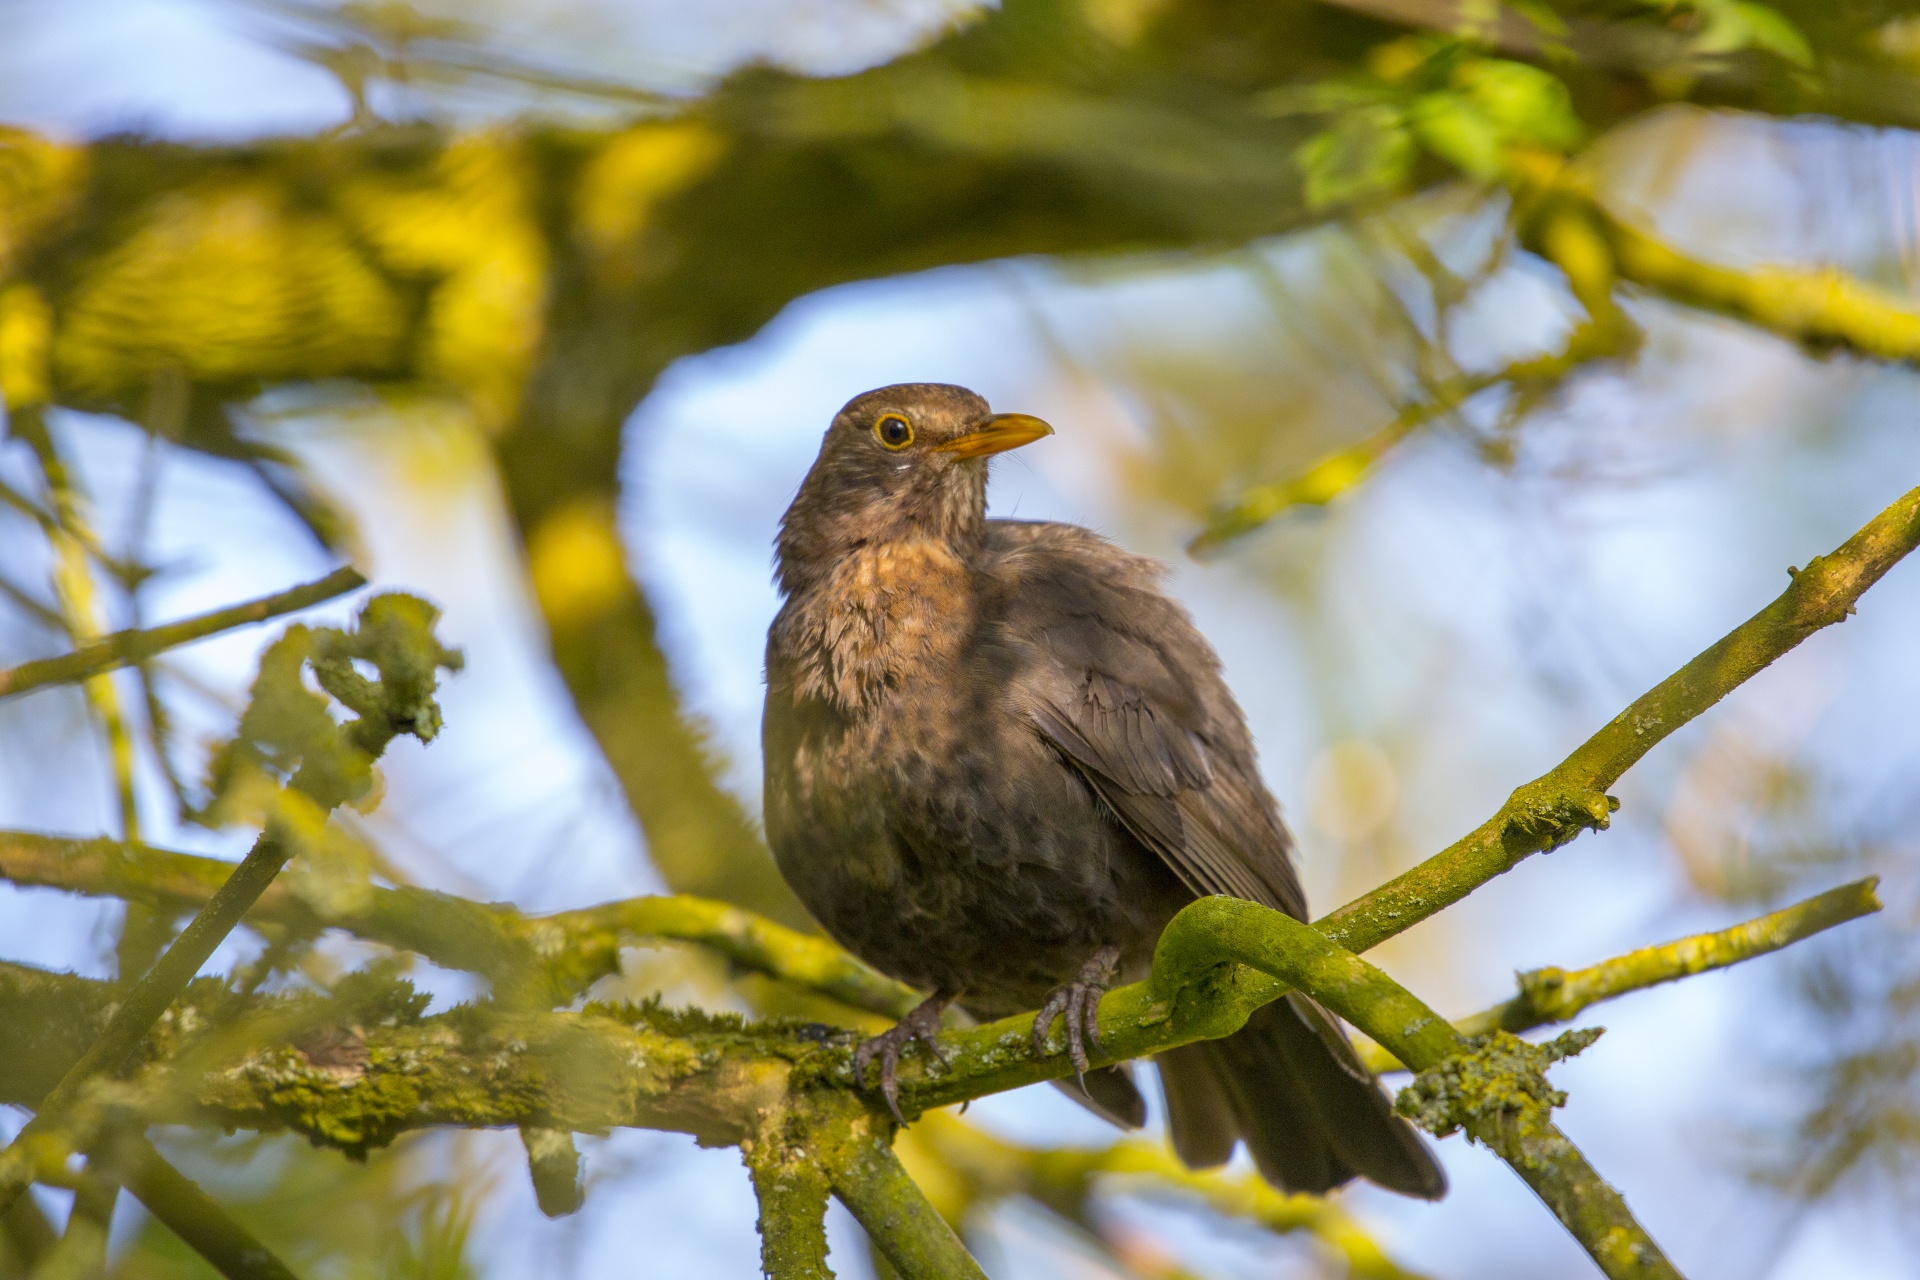 Blackbird is a species of true thrush. It is also called Eurasian blackbird, or simply blackbird where this does not lead to confusion with a similar-looking local species